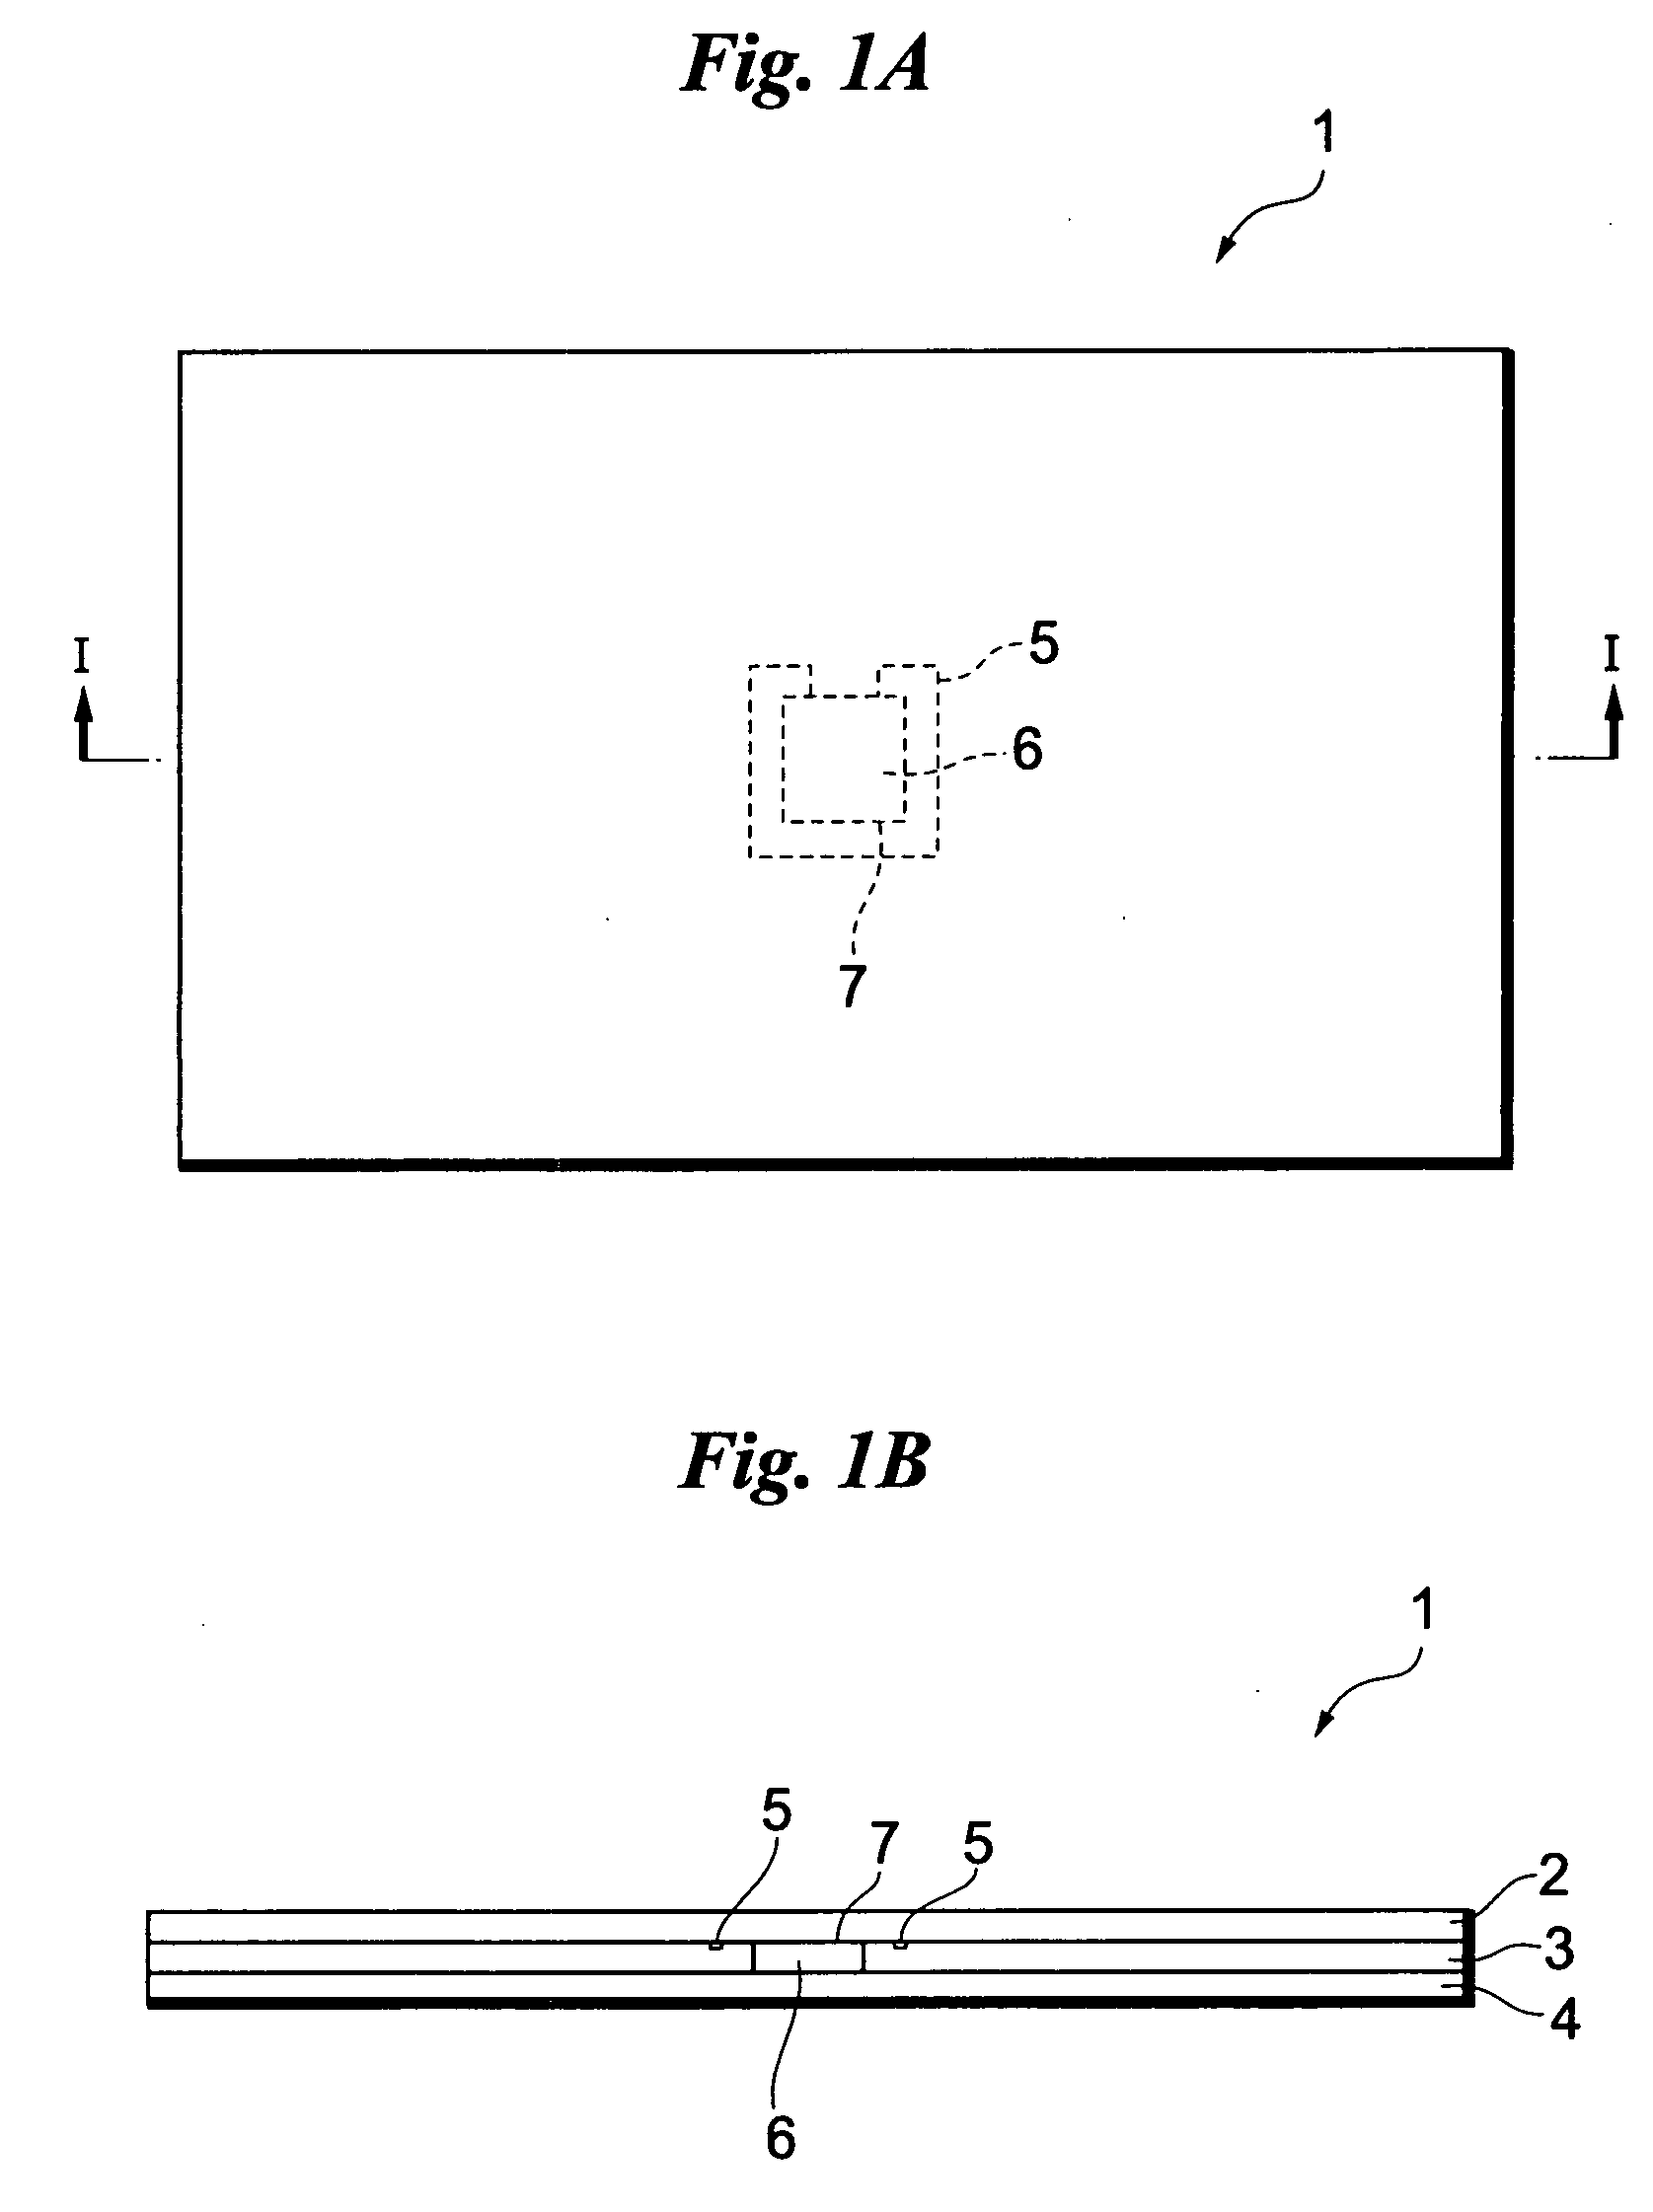 Antenna-containing substrate